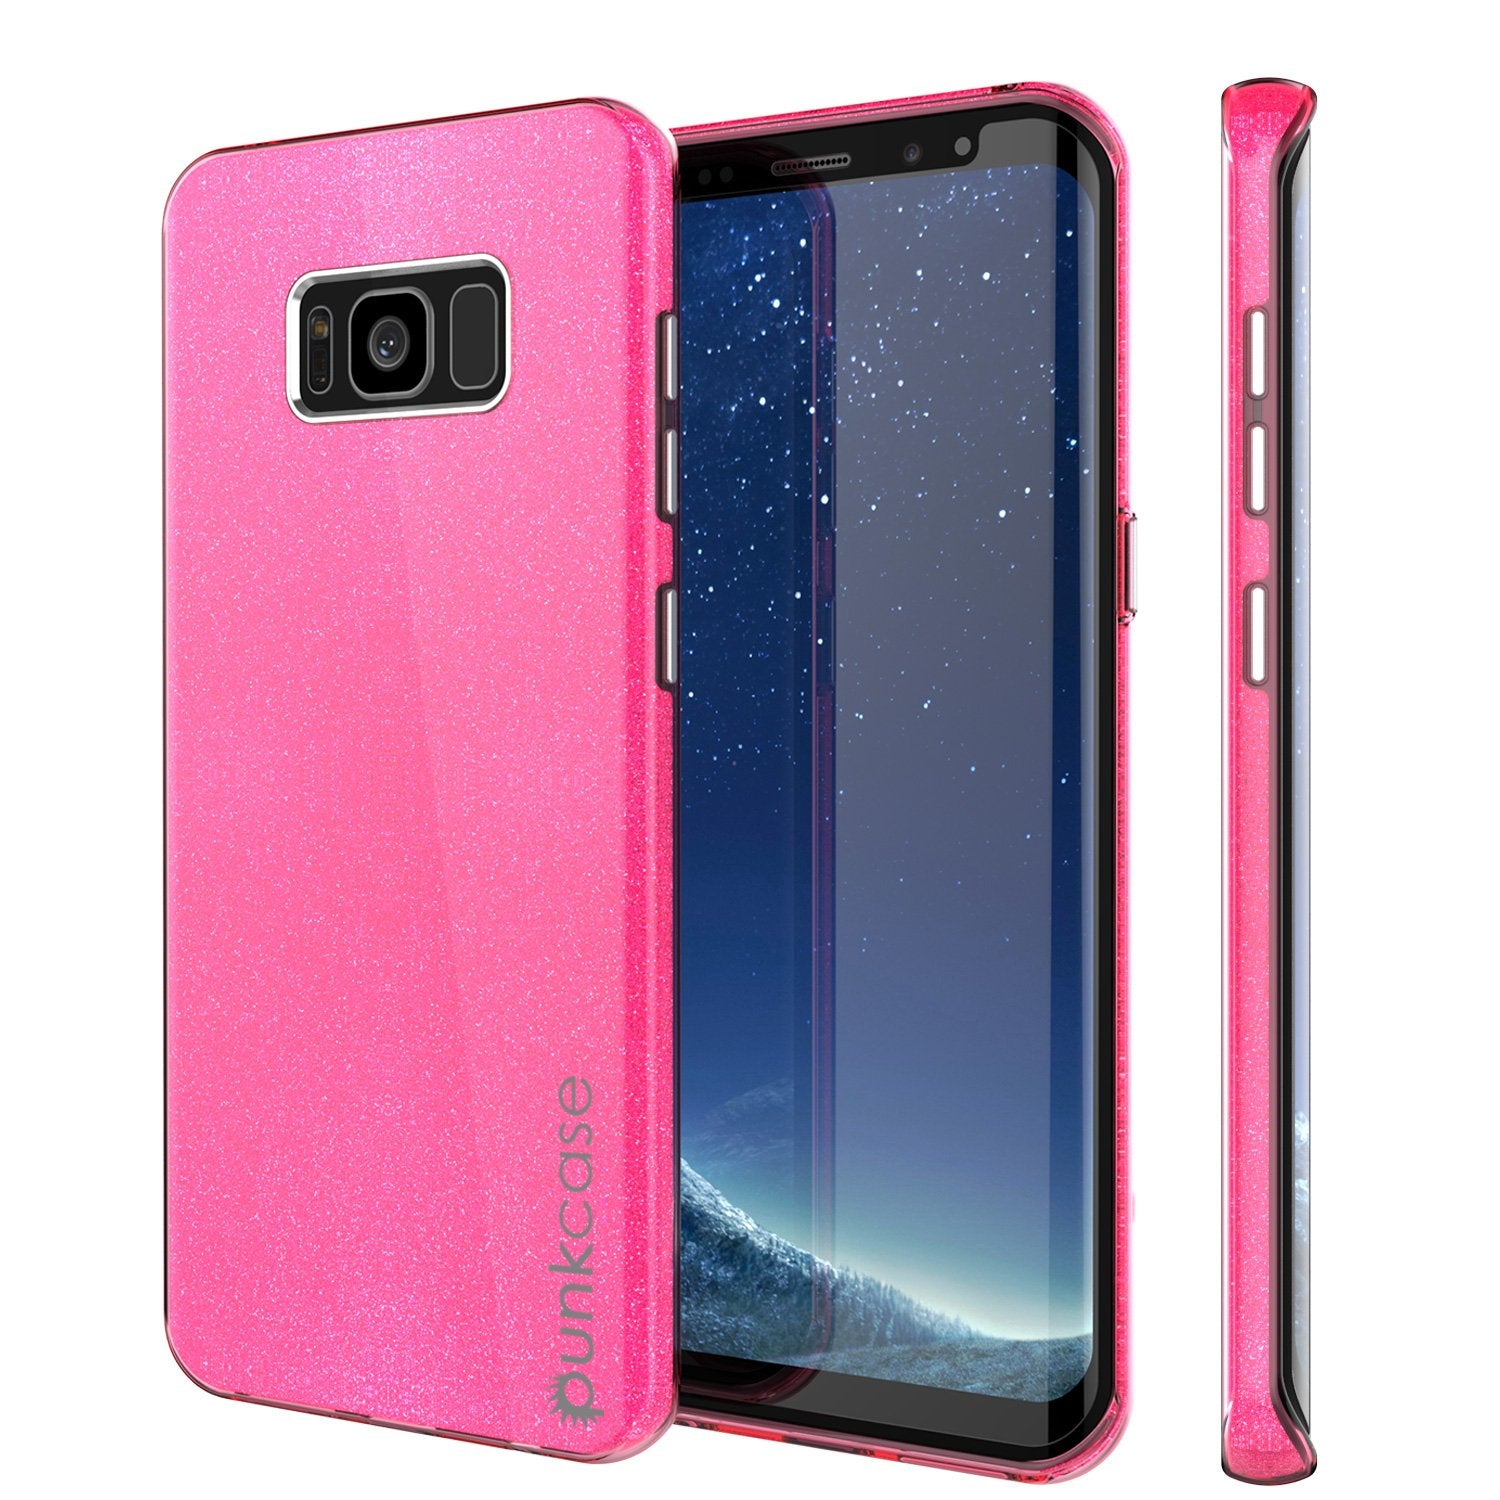 Galaxy S8 Case, Punkcase Galactic 2.0 Series Ultra Slim Protective Armor TPU Cover w/ PunkShield Screen Protector | Lifetime Exchange Warranty | Designed for Samsung Galaxy S8 [Pink] - PunkCase NZ